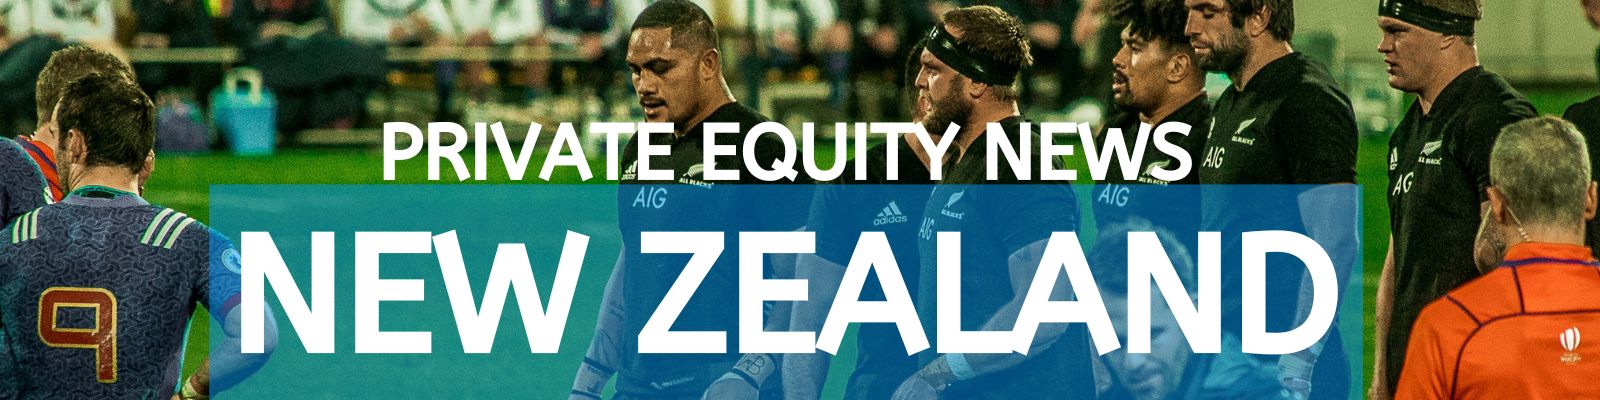 New Zealand Private Equity News New Zealand